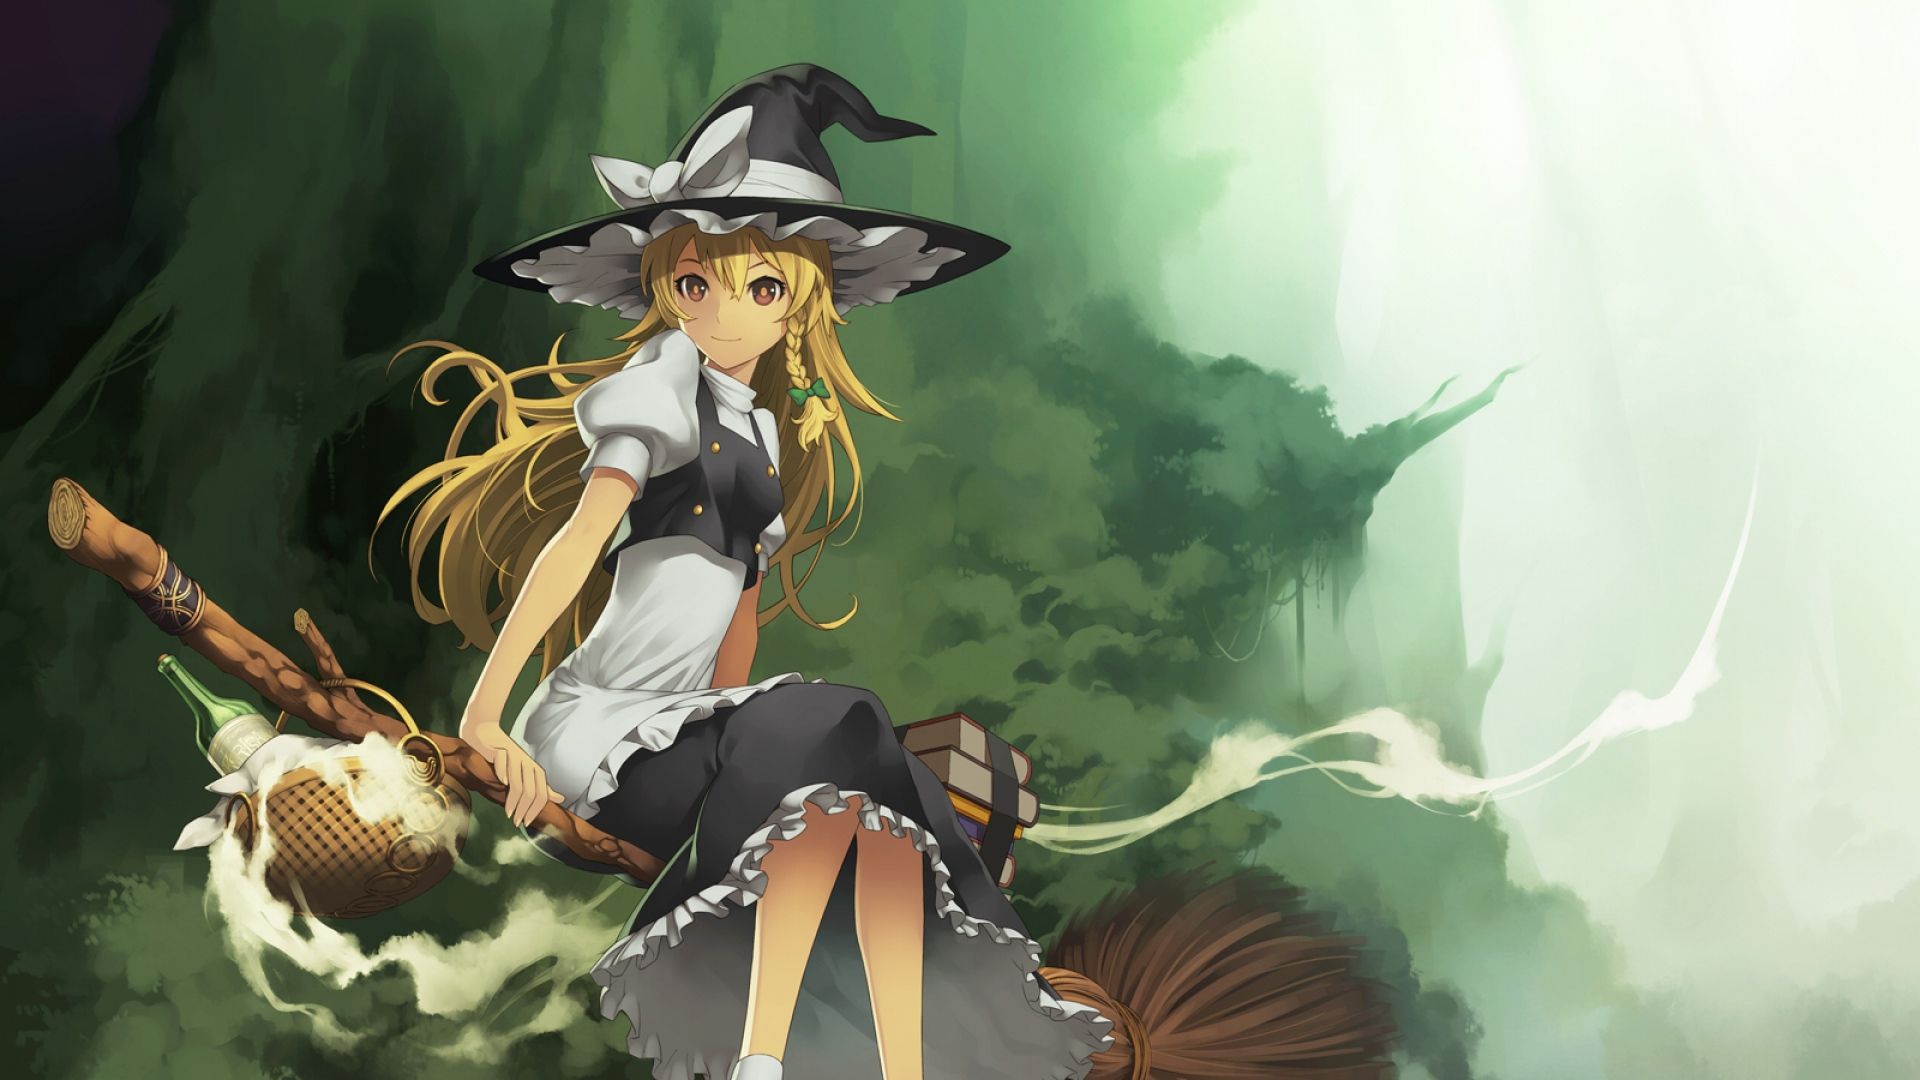 Download Wallpaper 1920x1080 Girl, Broom, Hat, Witch, Witchcraft